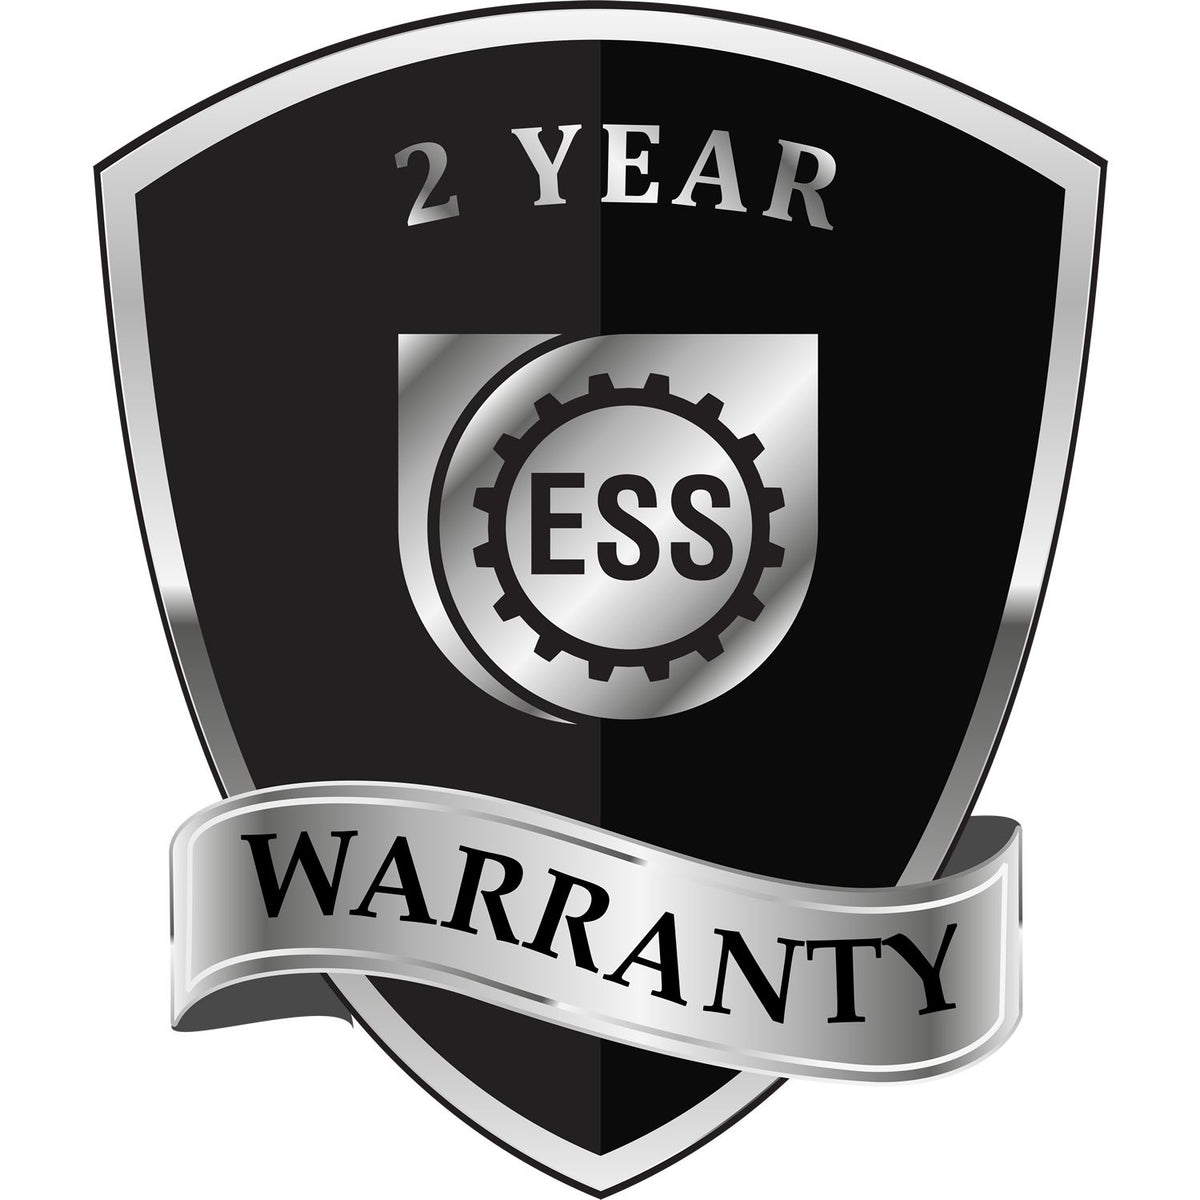 A badge or emblem showing a warranty icon for the Soft Iowa Professional Engineer Seal